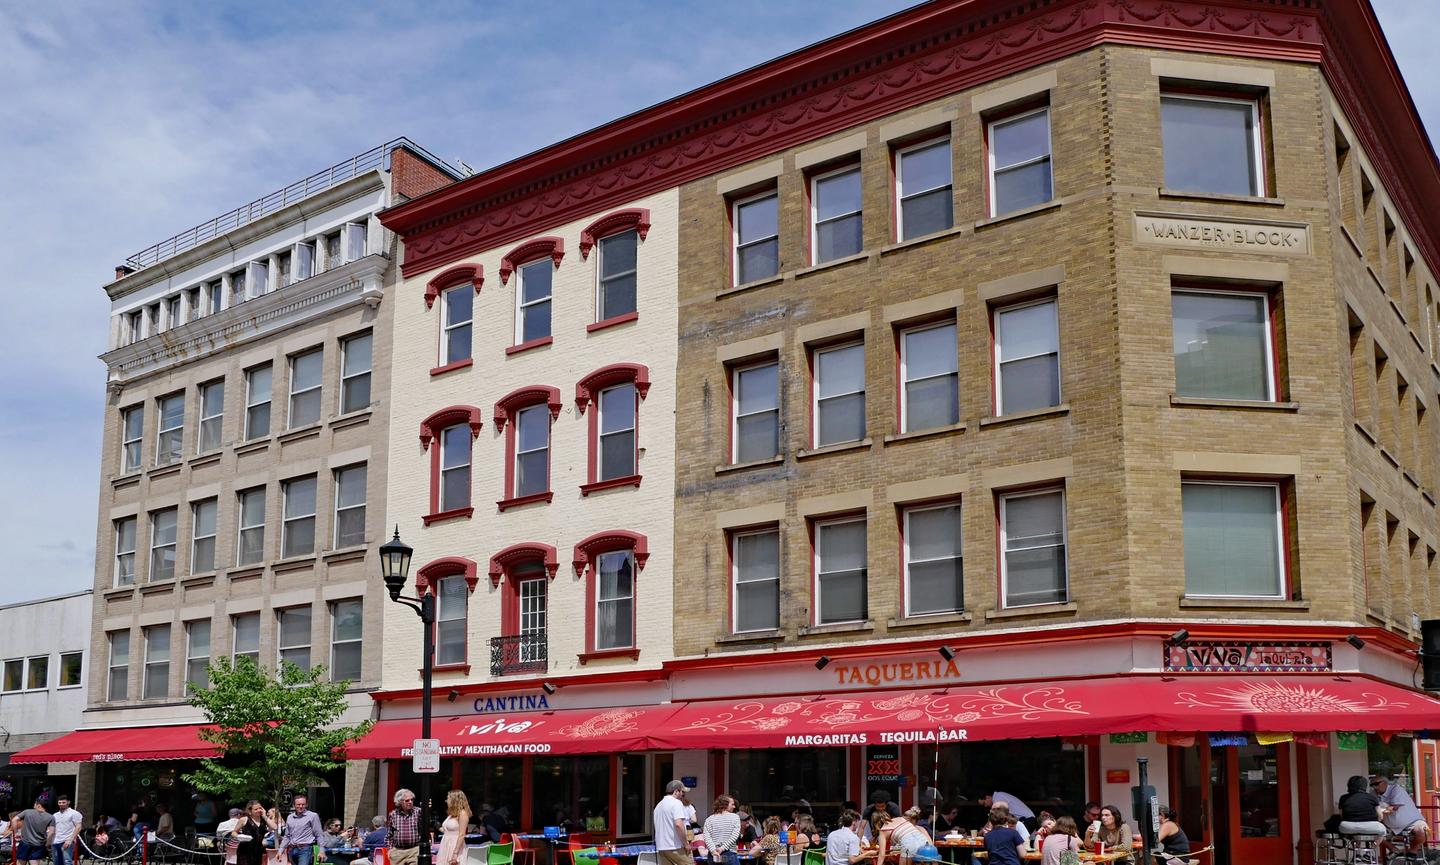 Ithaca, New York, has a thriving downtown, which includes many eclectic shops, restaurants and pubs.